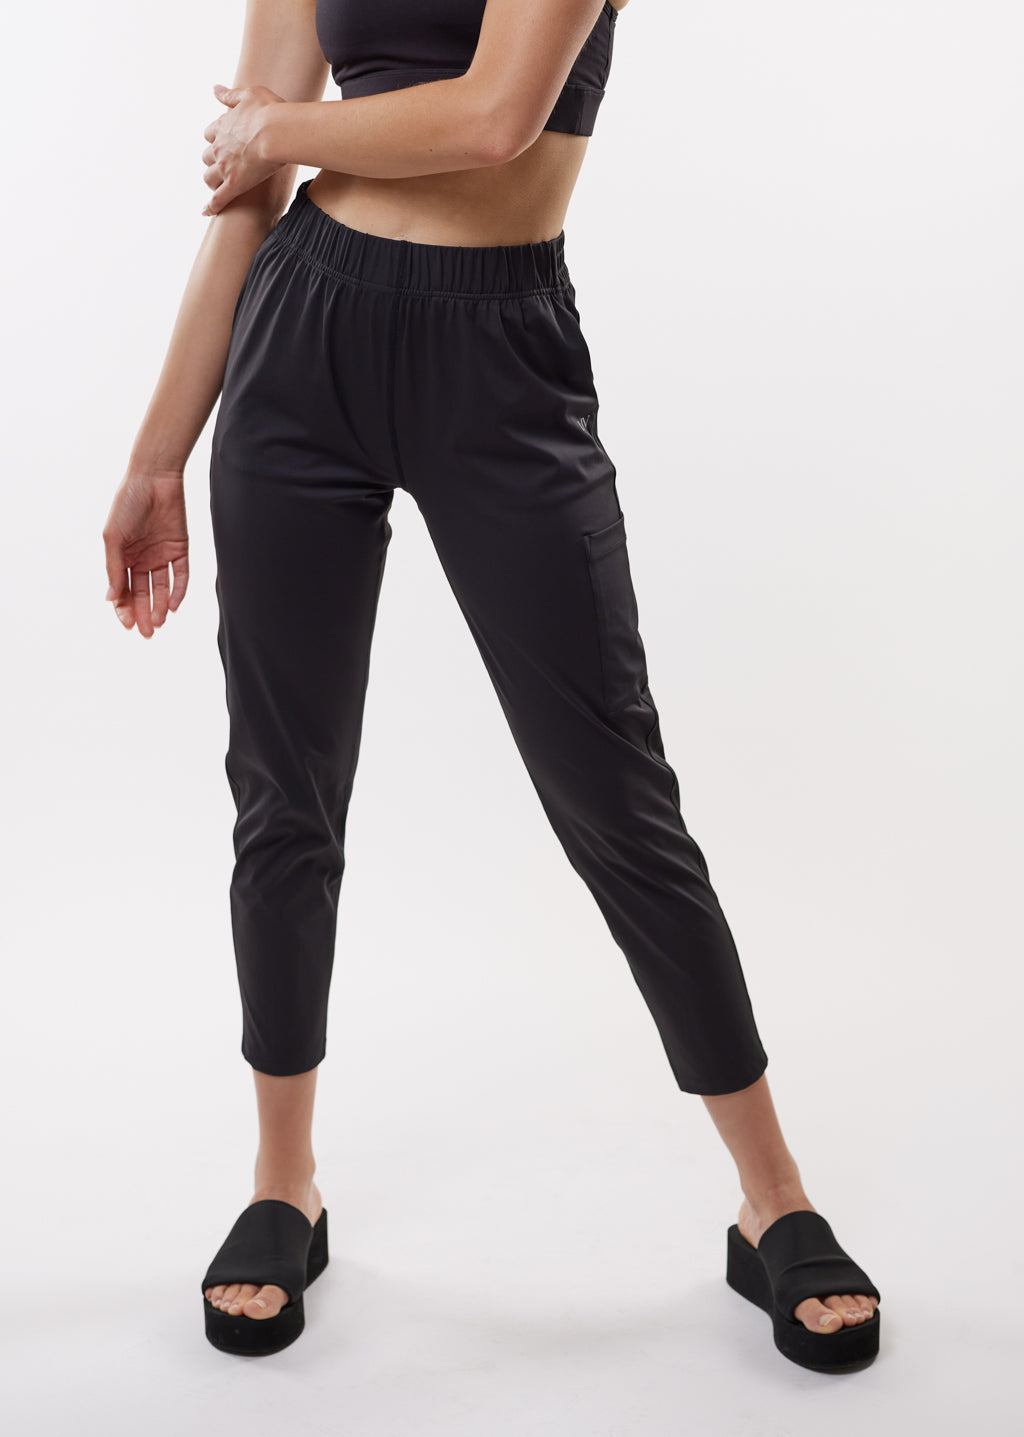 BlkWht Gaiam Yoga Pants, Small – Once & Again Boutique and Consignment